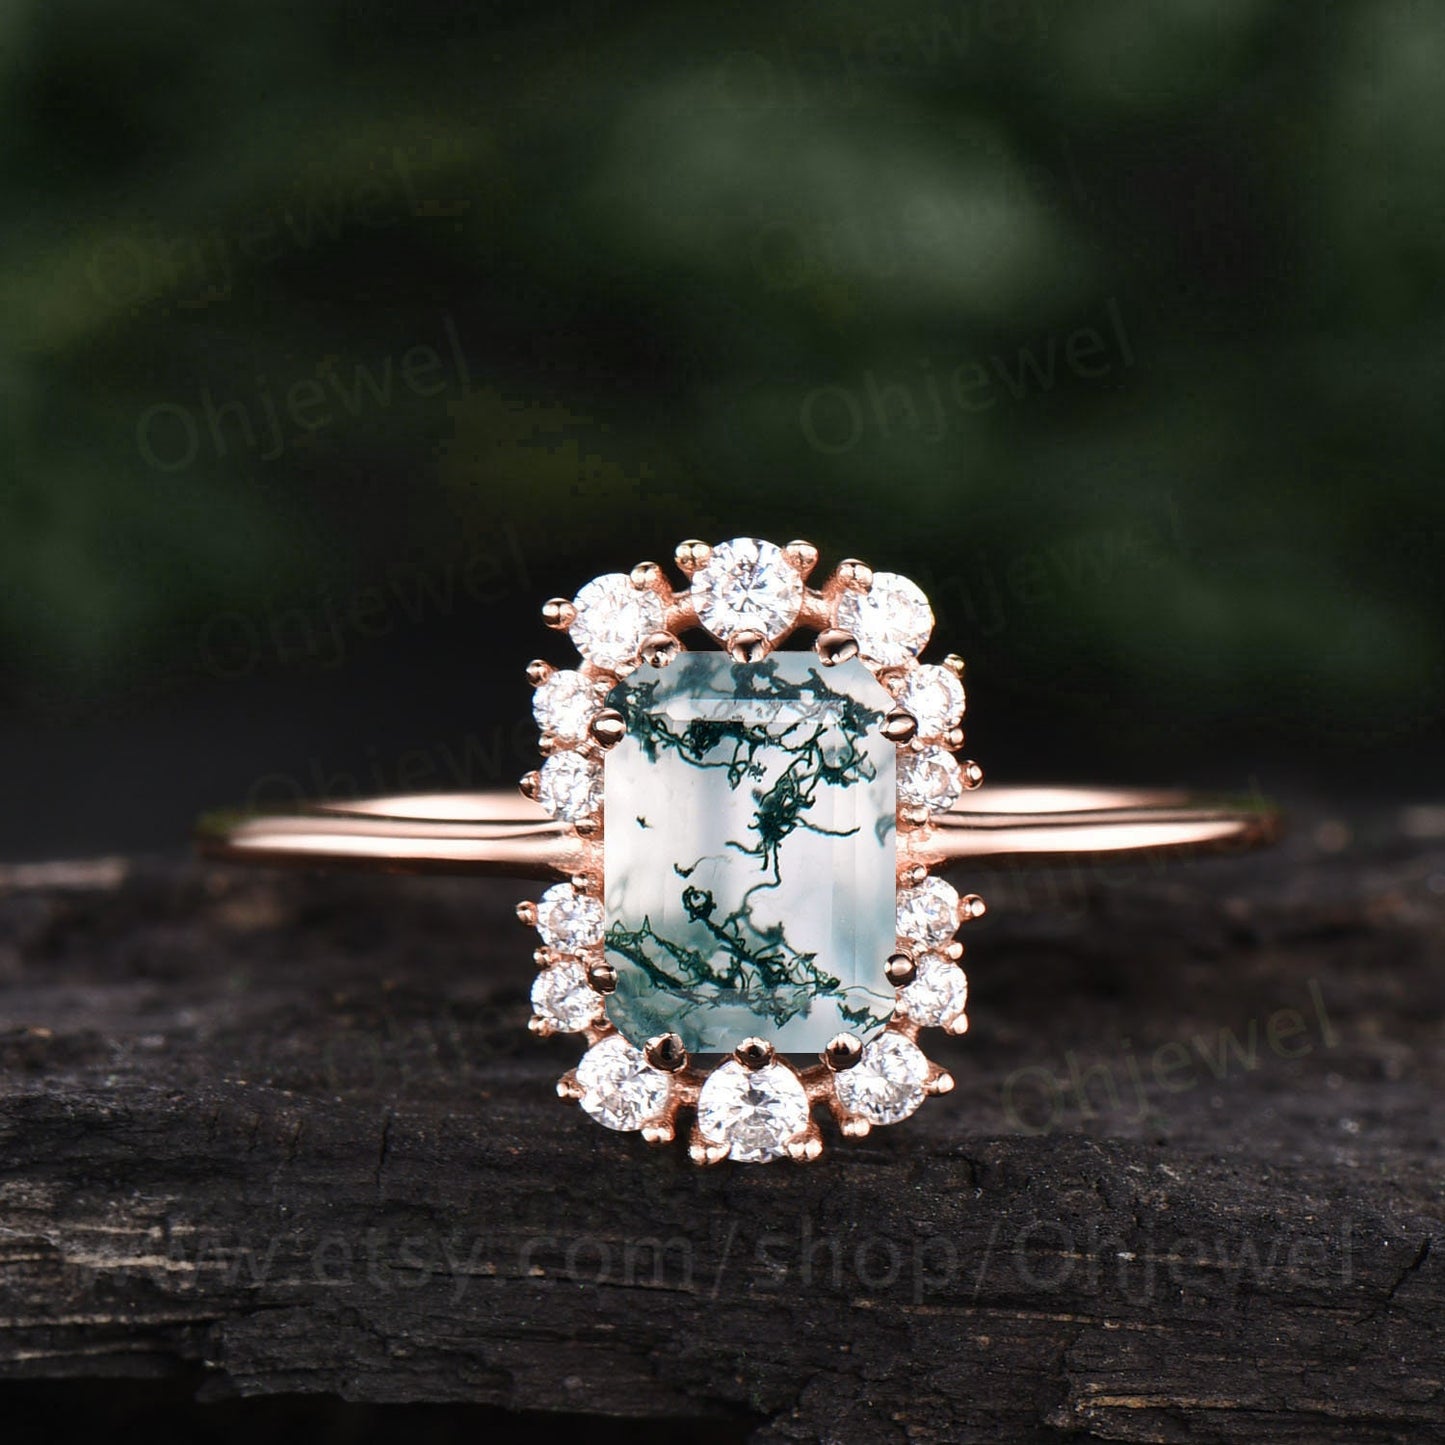 Unique moss agate ring emerald cut moss agate engagement ring for women vintage cluster halo moissanite ring gold silver dainty jewelry gift